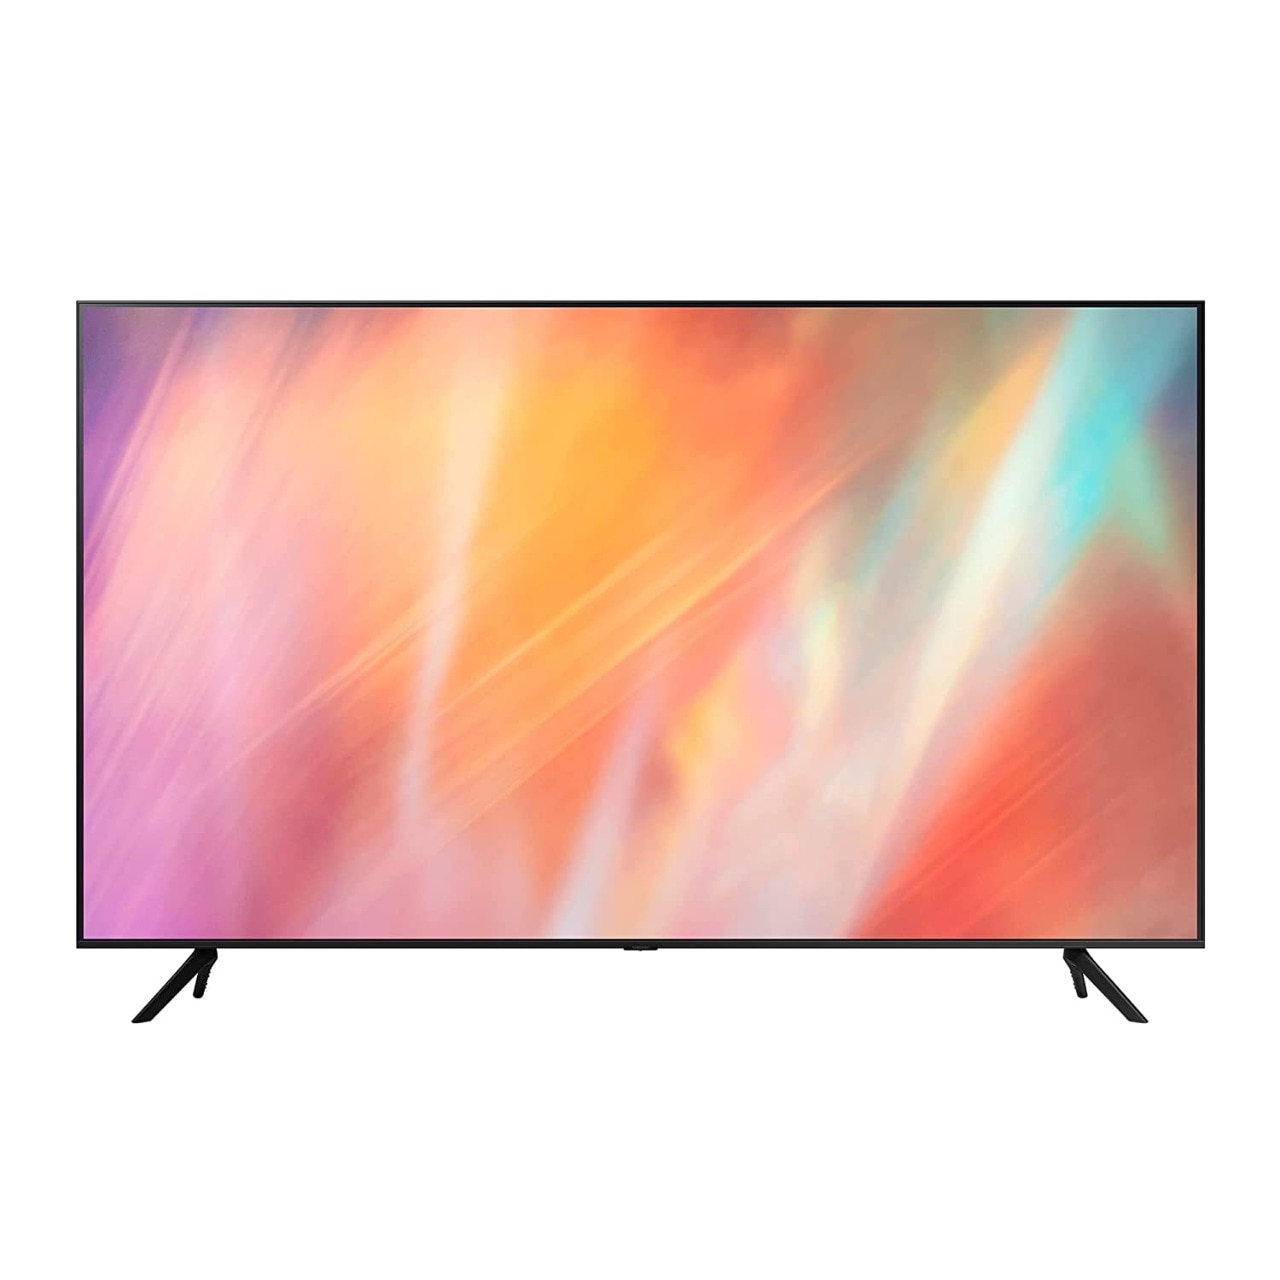 Amazon Festival Sale: This Diwali, make home theater at home, buy Sony's 55-inch TV at a discount of up to Rs 35,000